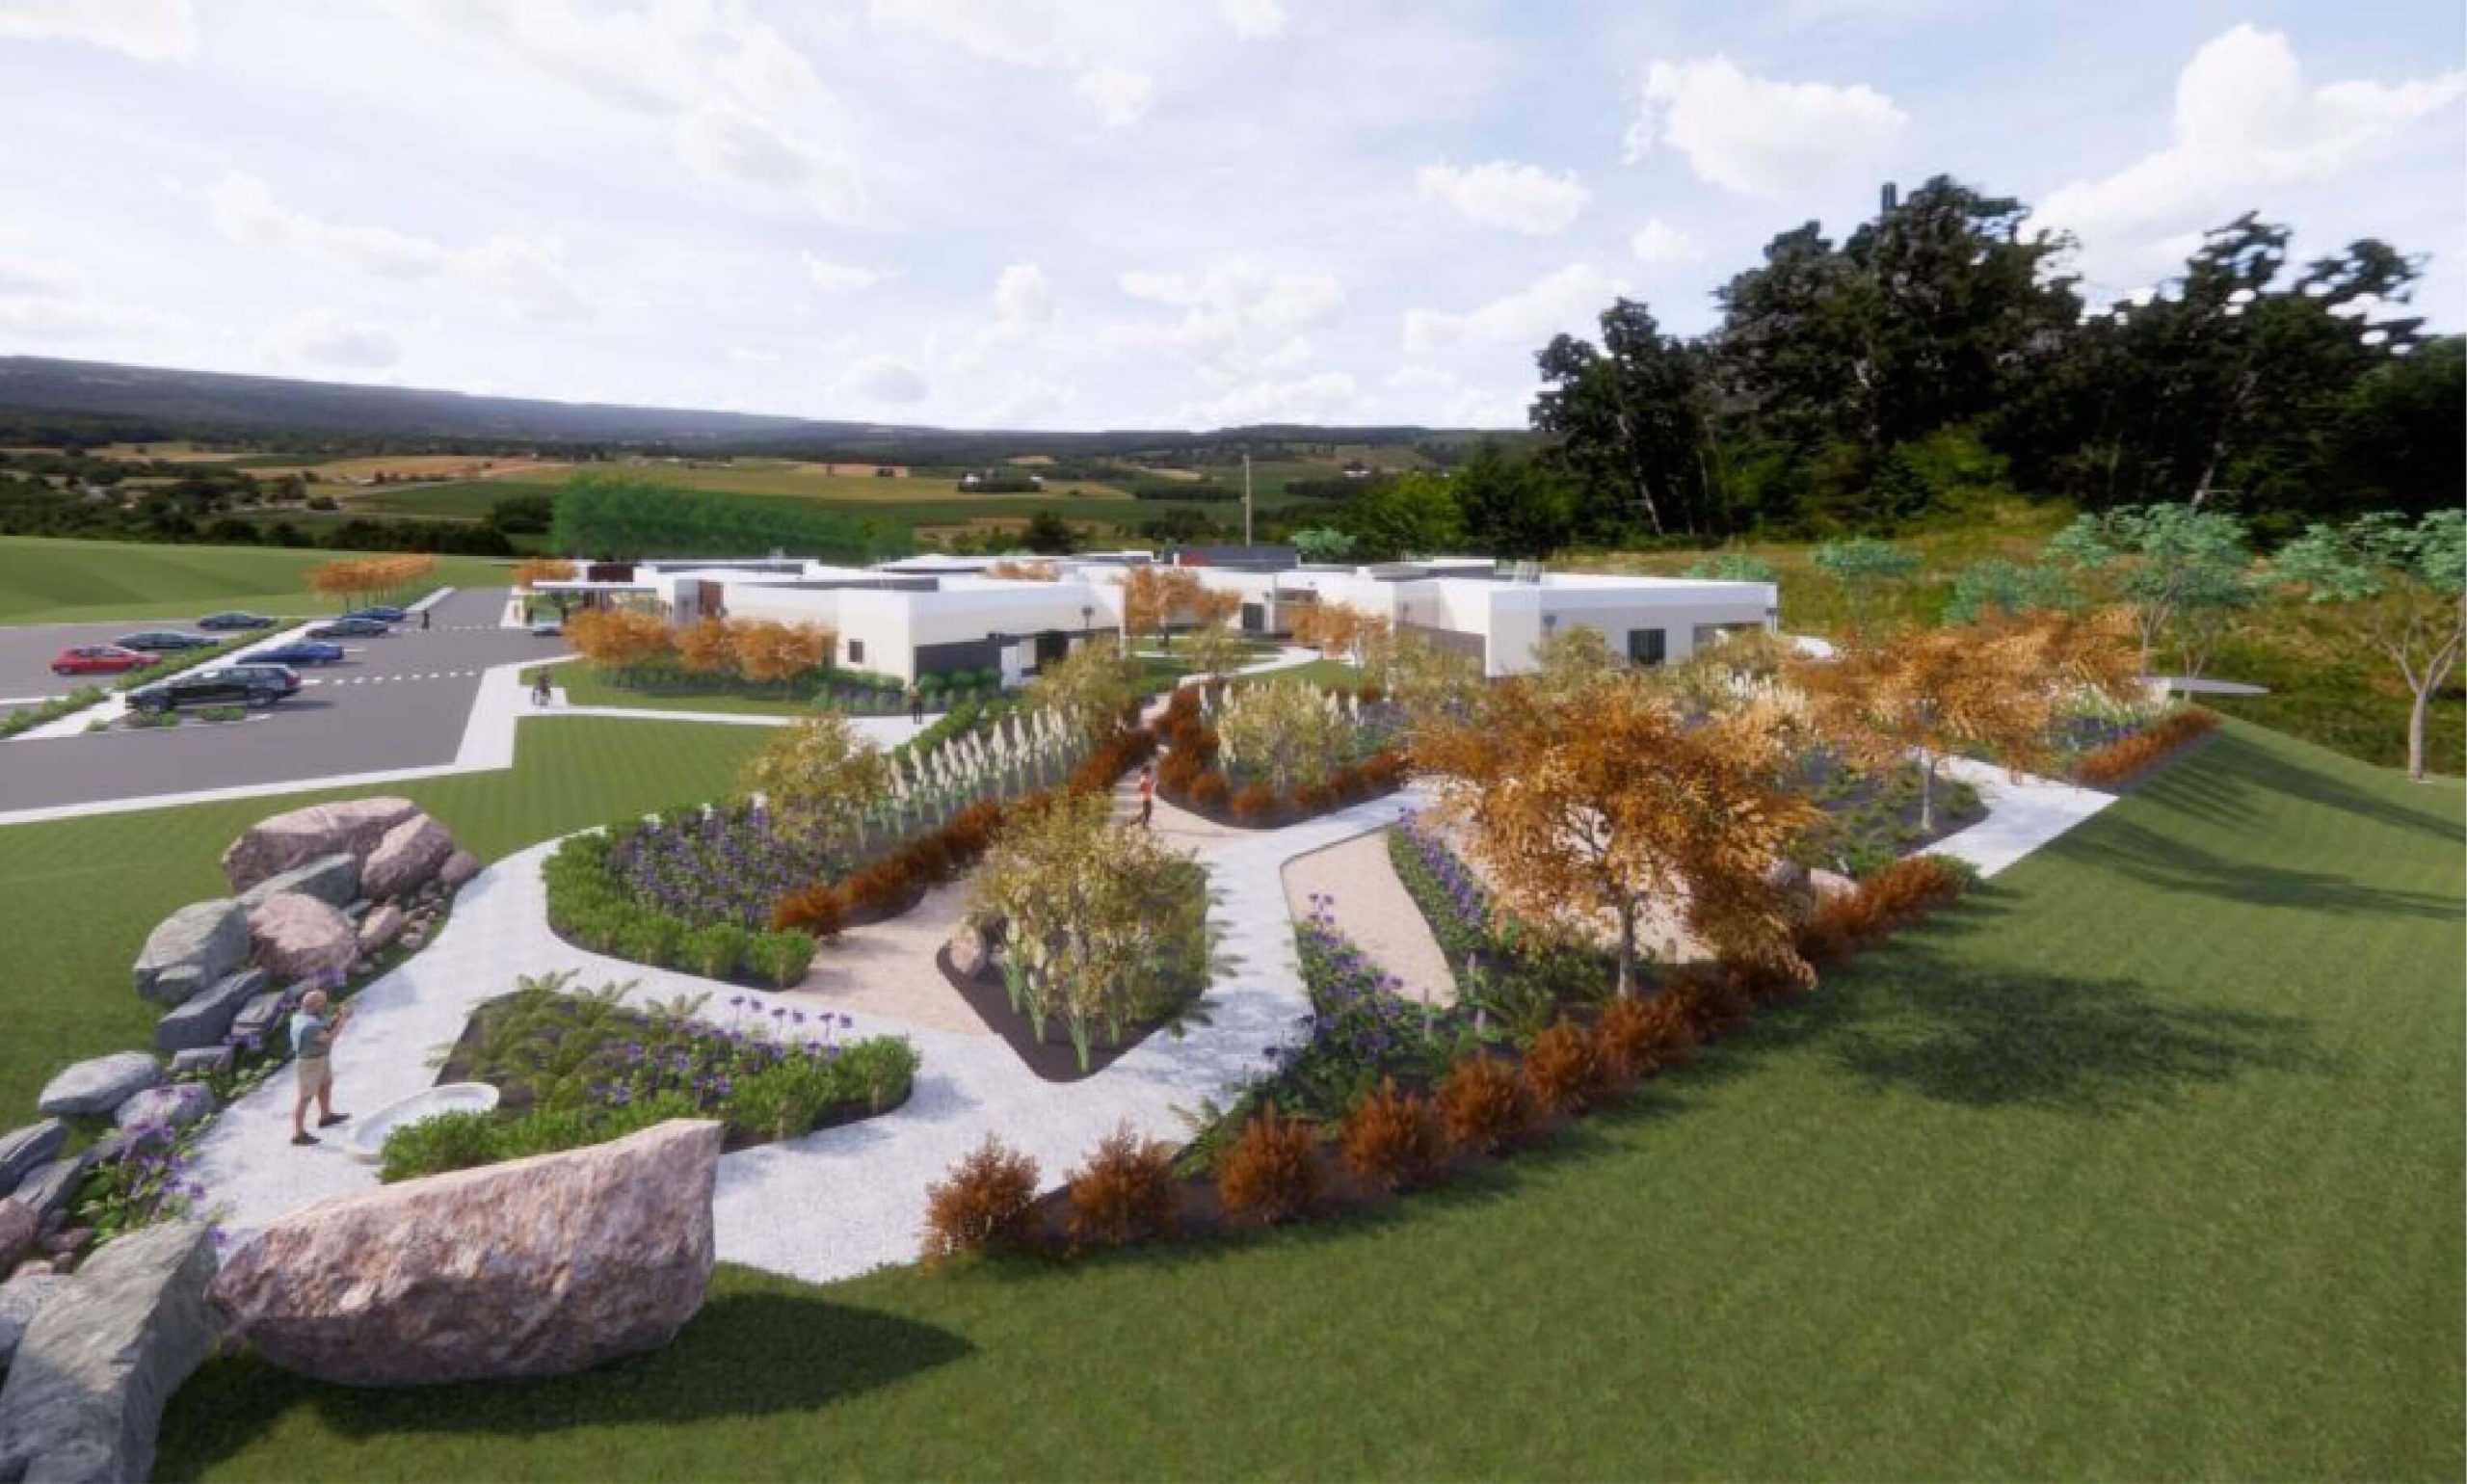 Artist impression of the building and grounds of the new Anam Cara